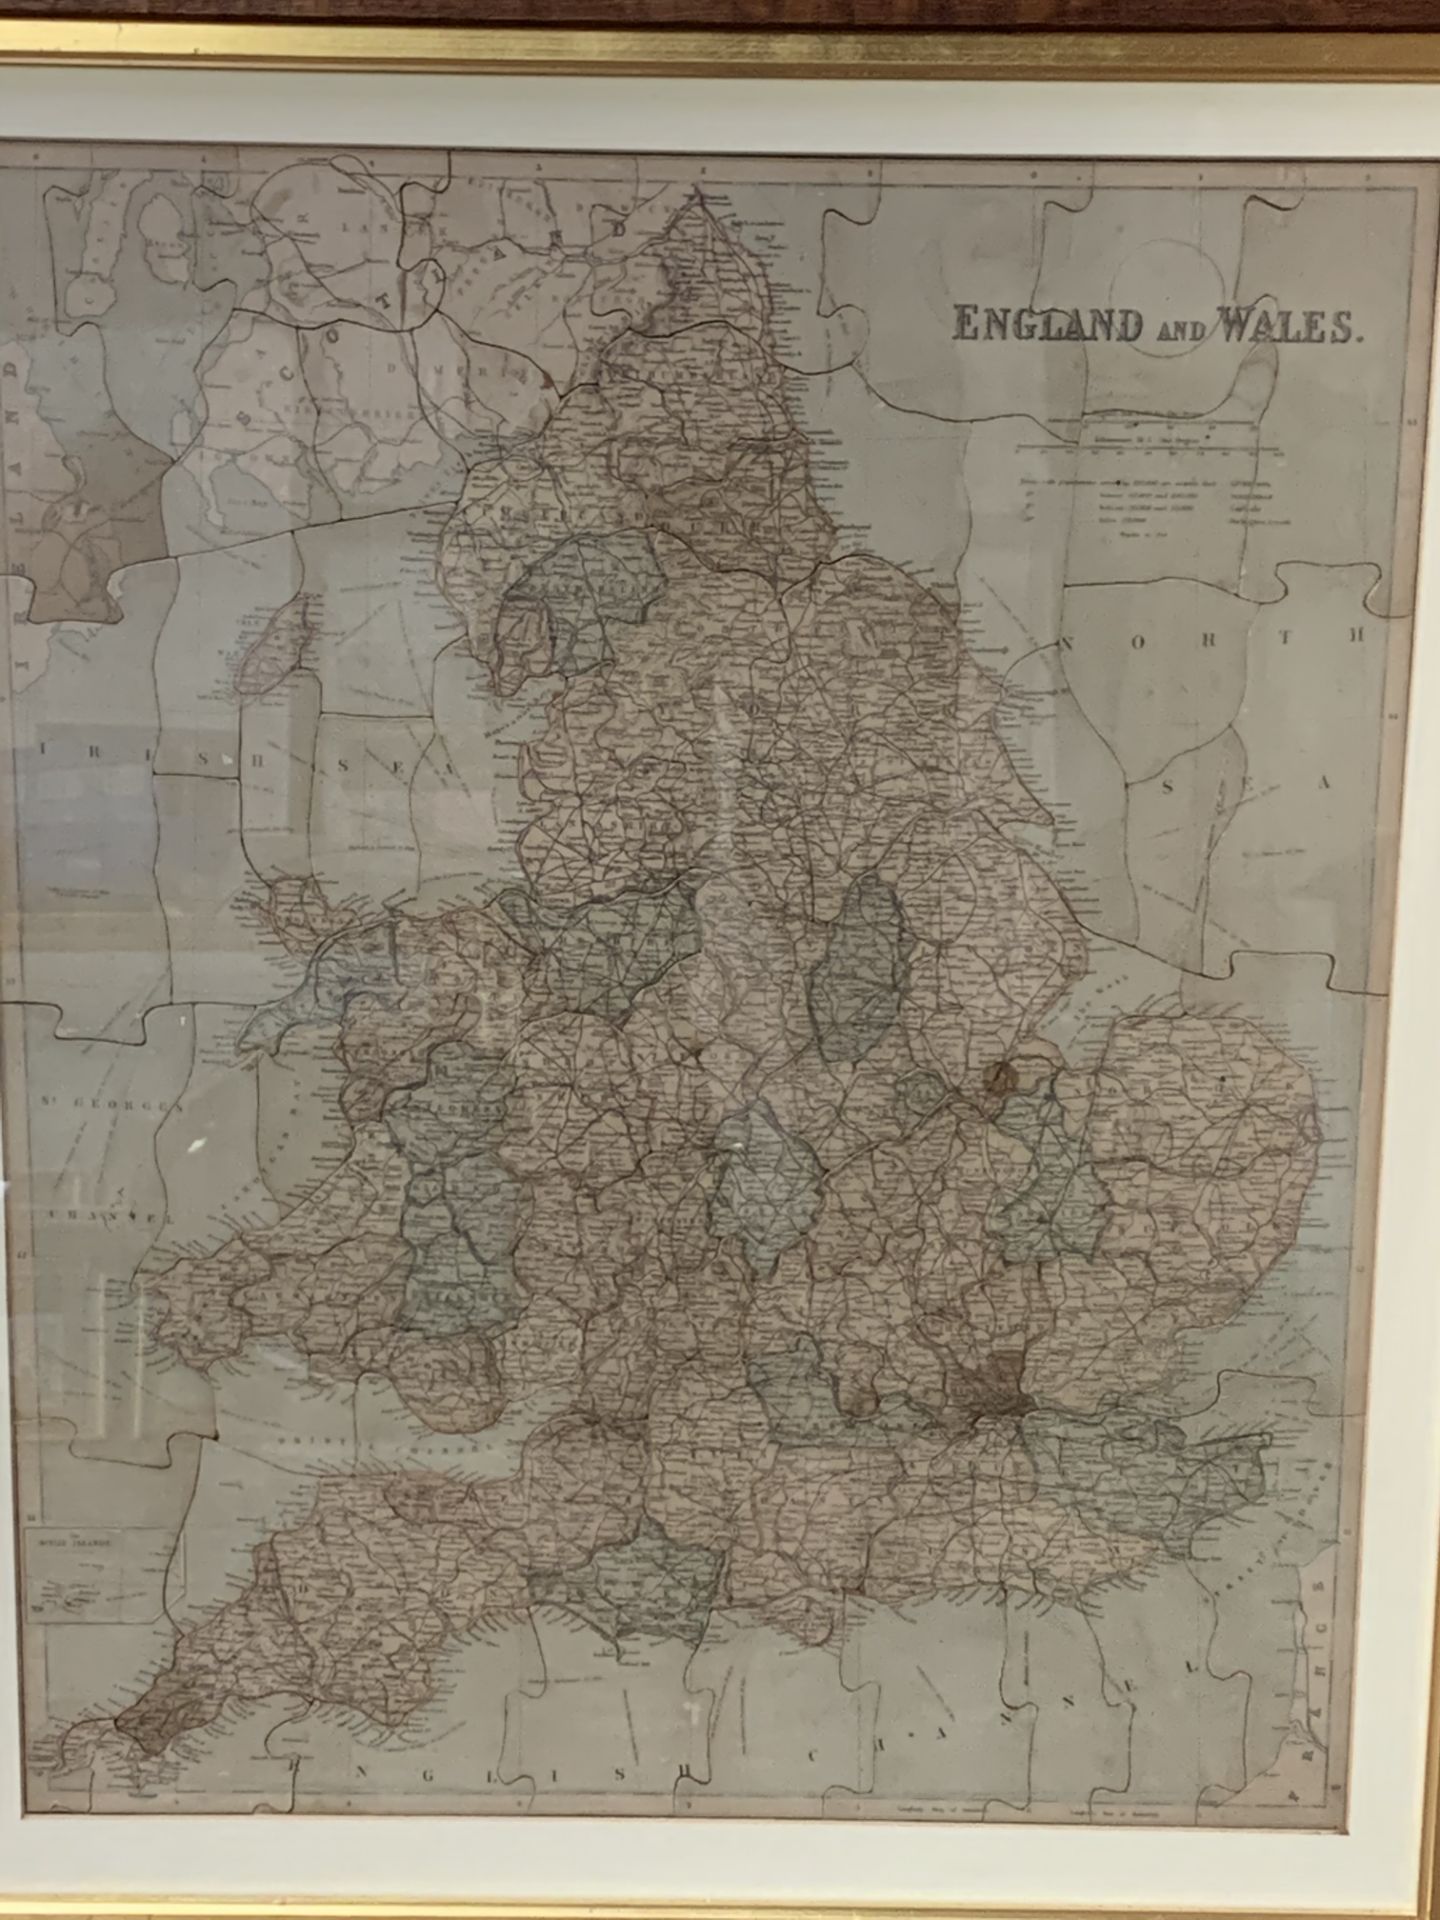 Framed and glazed jigsaw map of England and Wales, showing all the counties.